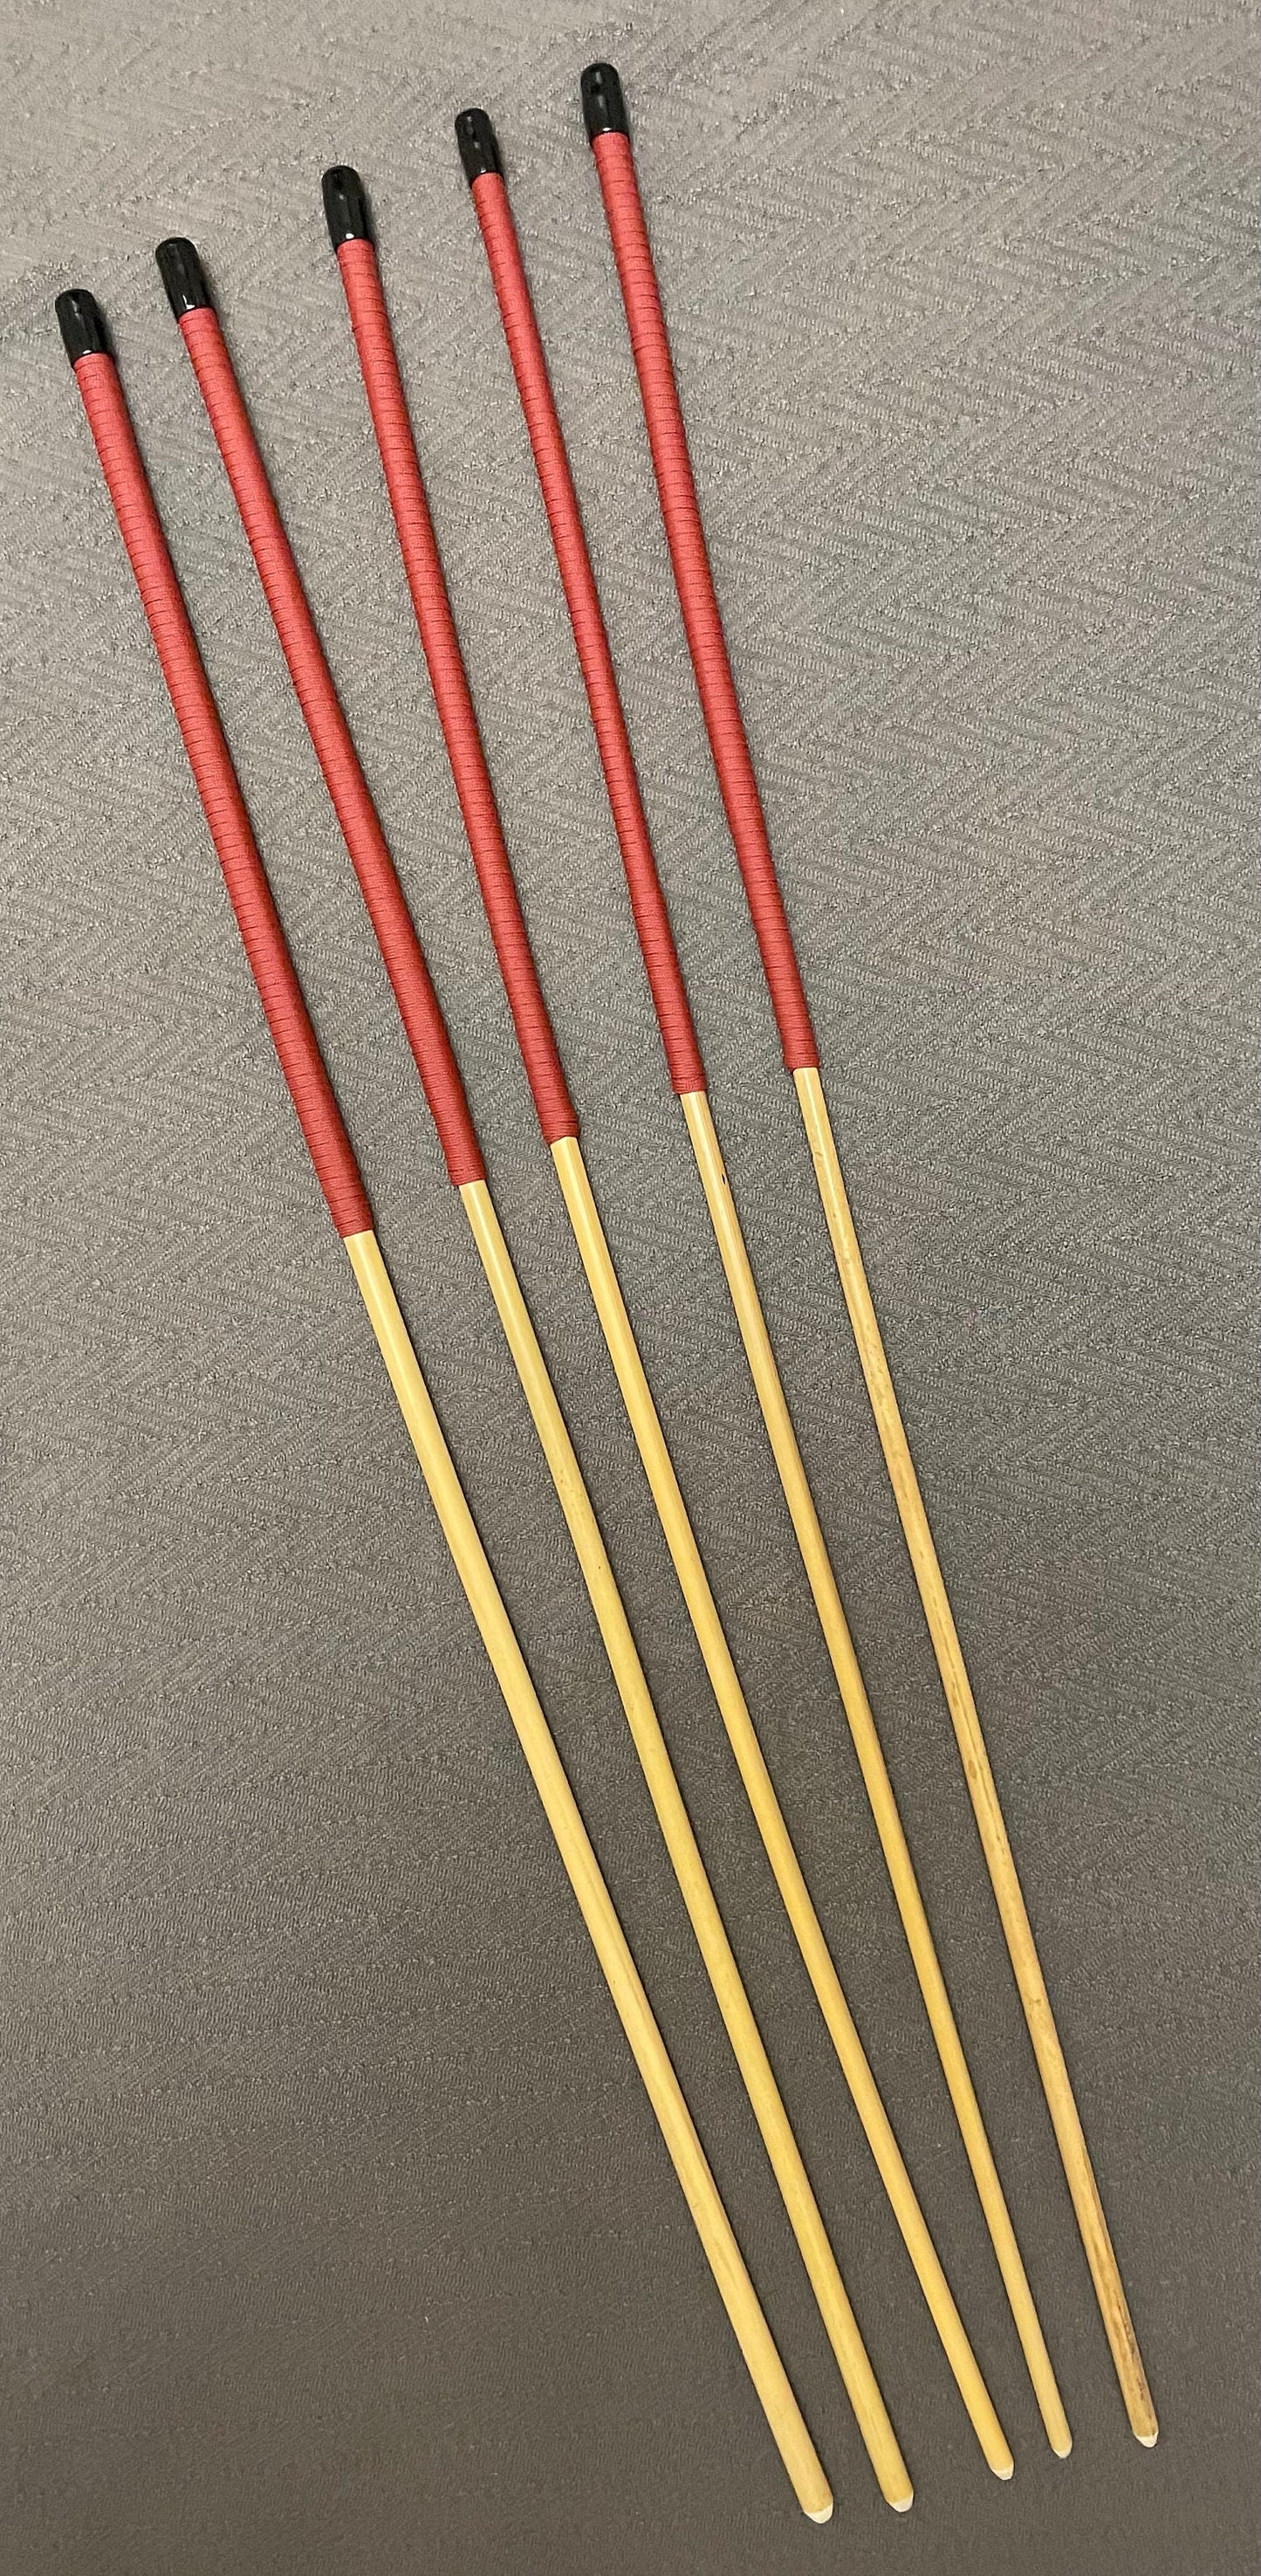 Knotless Dragon Cane / No Knot Dragon Canes / School Canes Set of 5 - 90-92 cms L & 8-8.5/9-9.5/10-10.5/11-11.5/12-12.5 mm D - 14" BRICK RED Paracord Handles